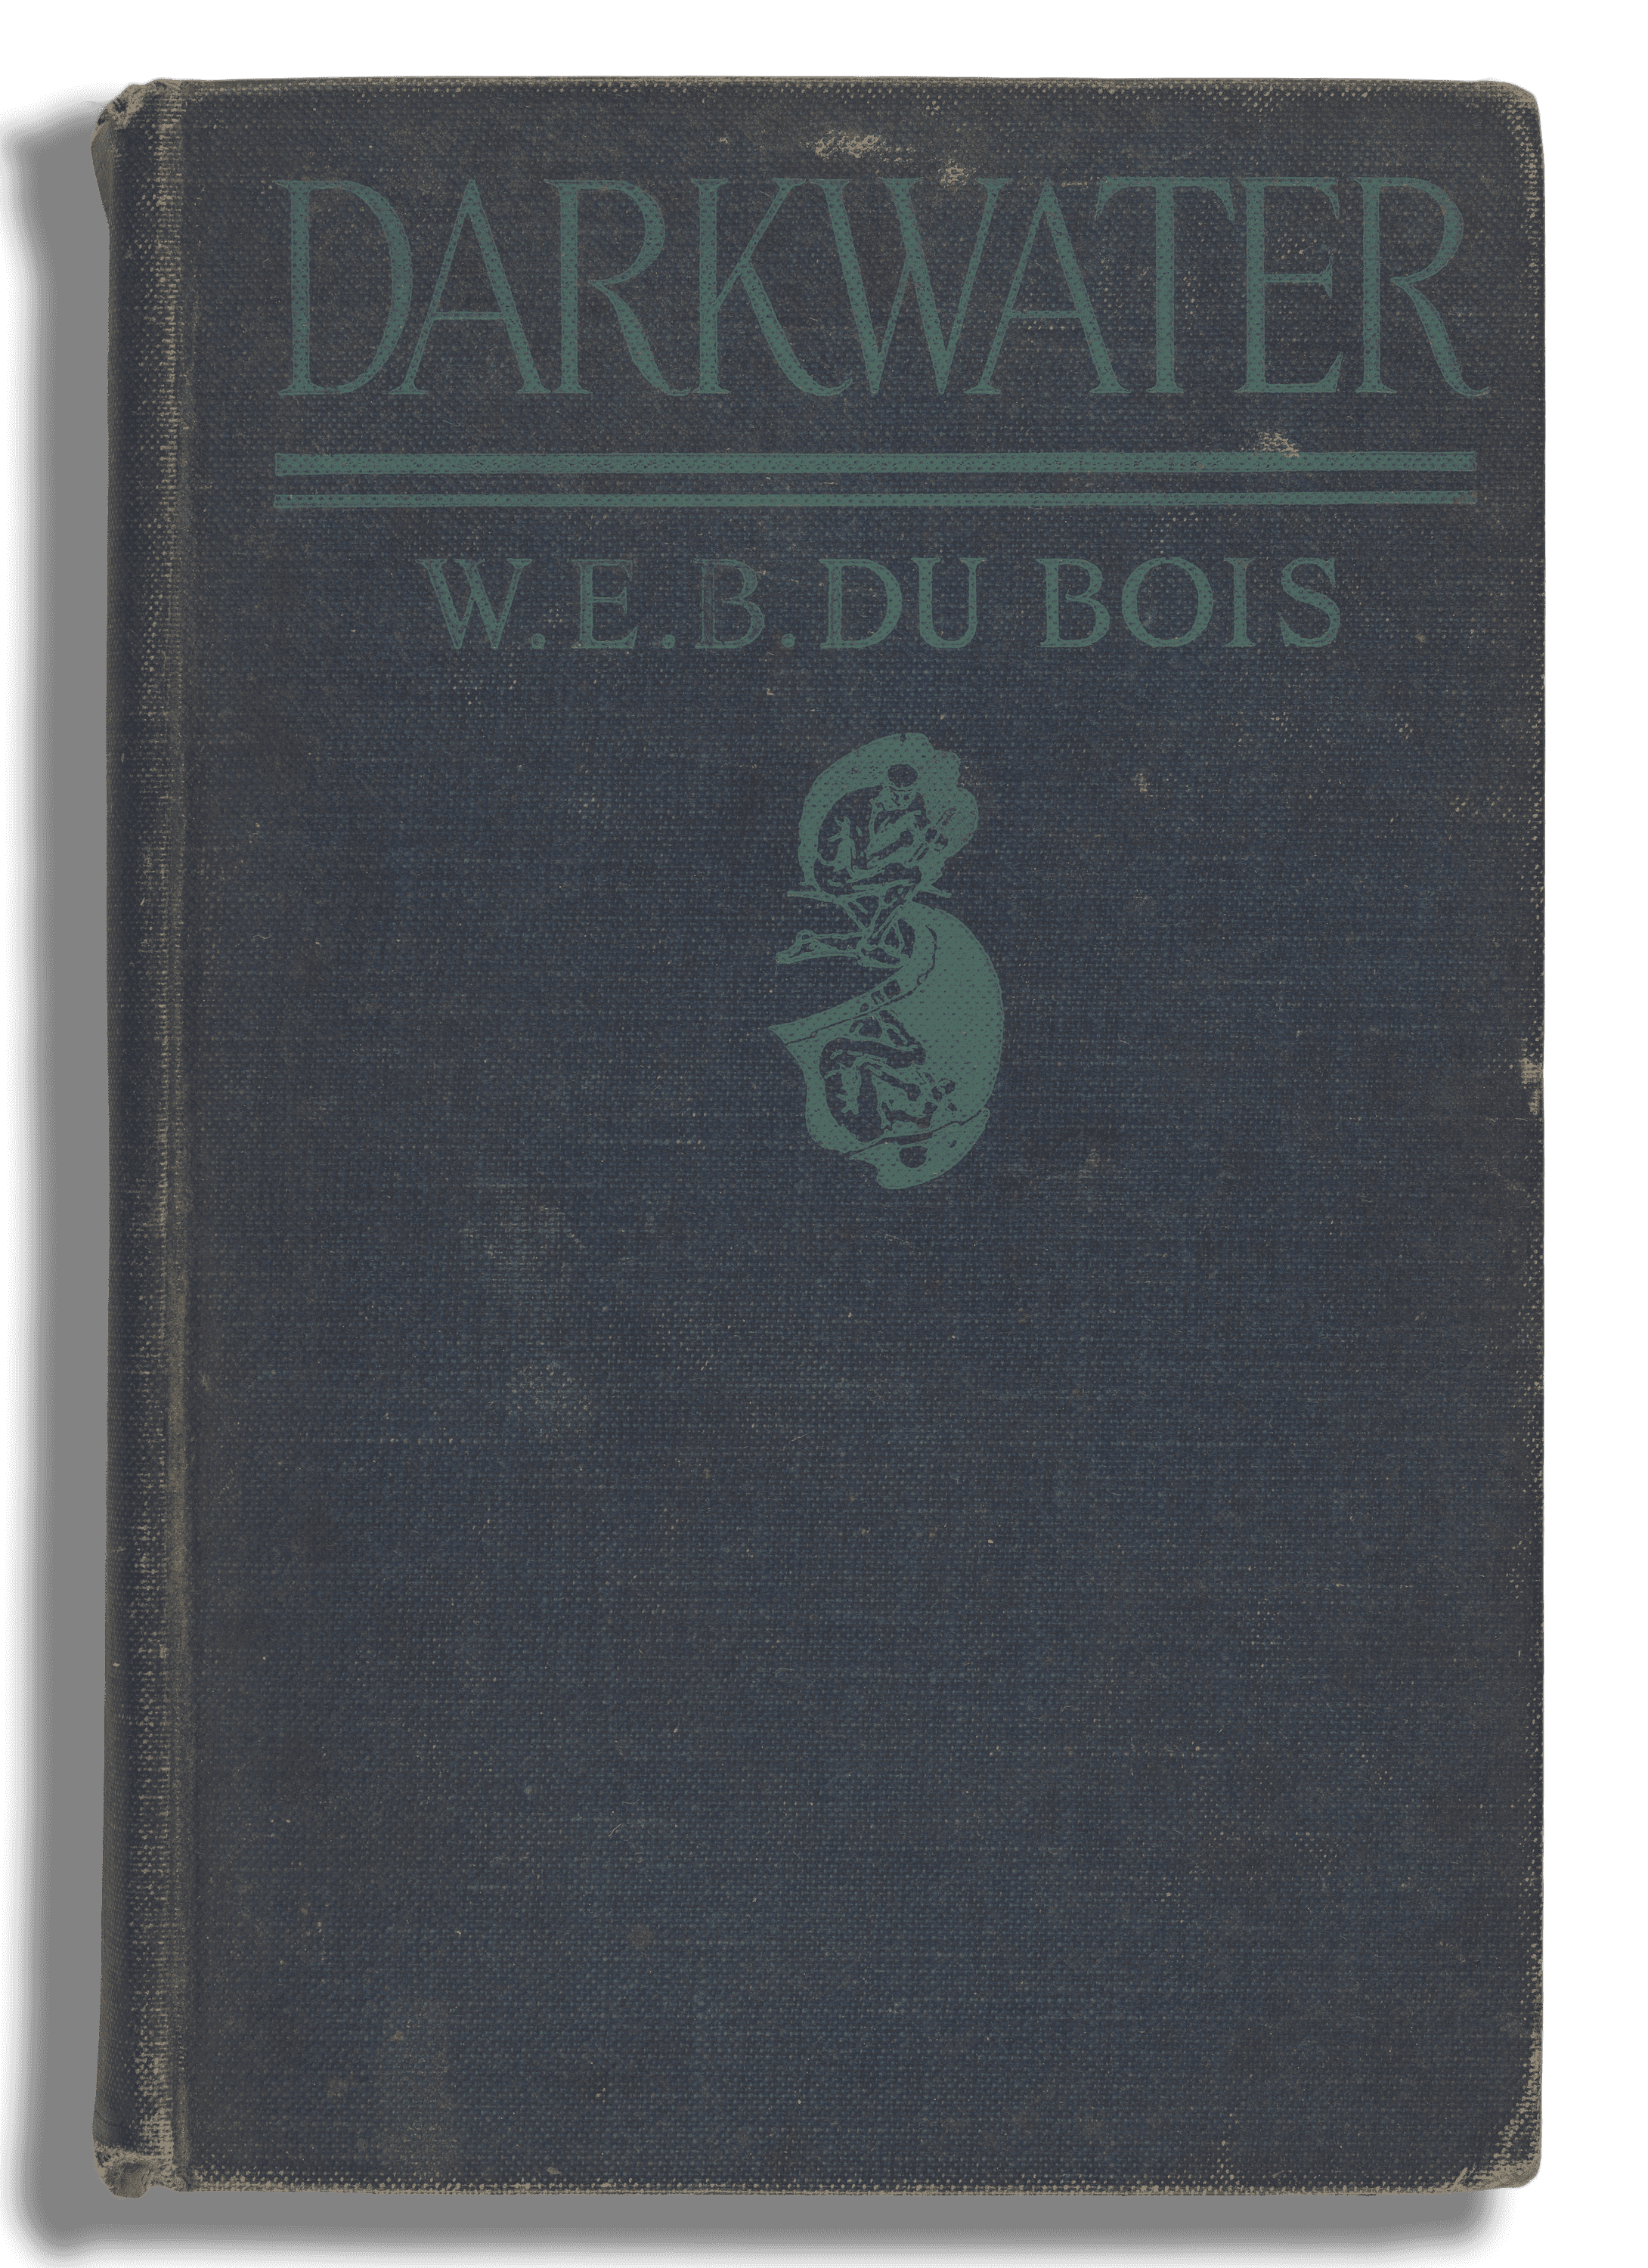 The cover of Darkwater: Voices from Within the Veil by W.E.B. Du Bois, 1920 is dark blue and worn around the edges.